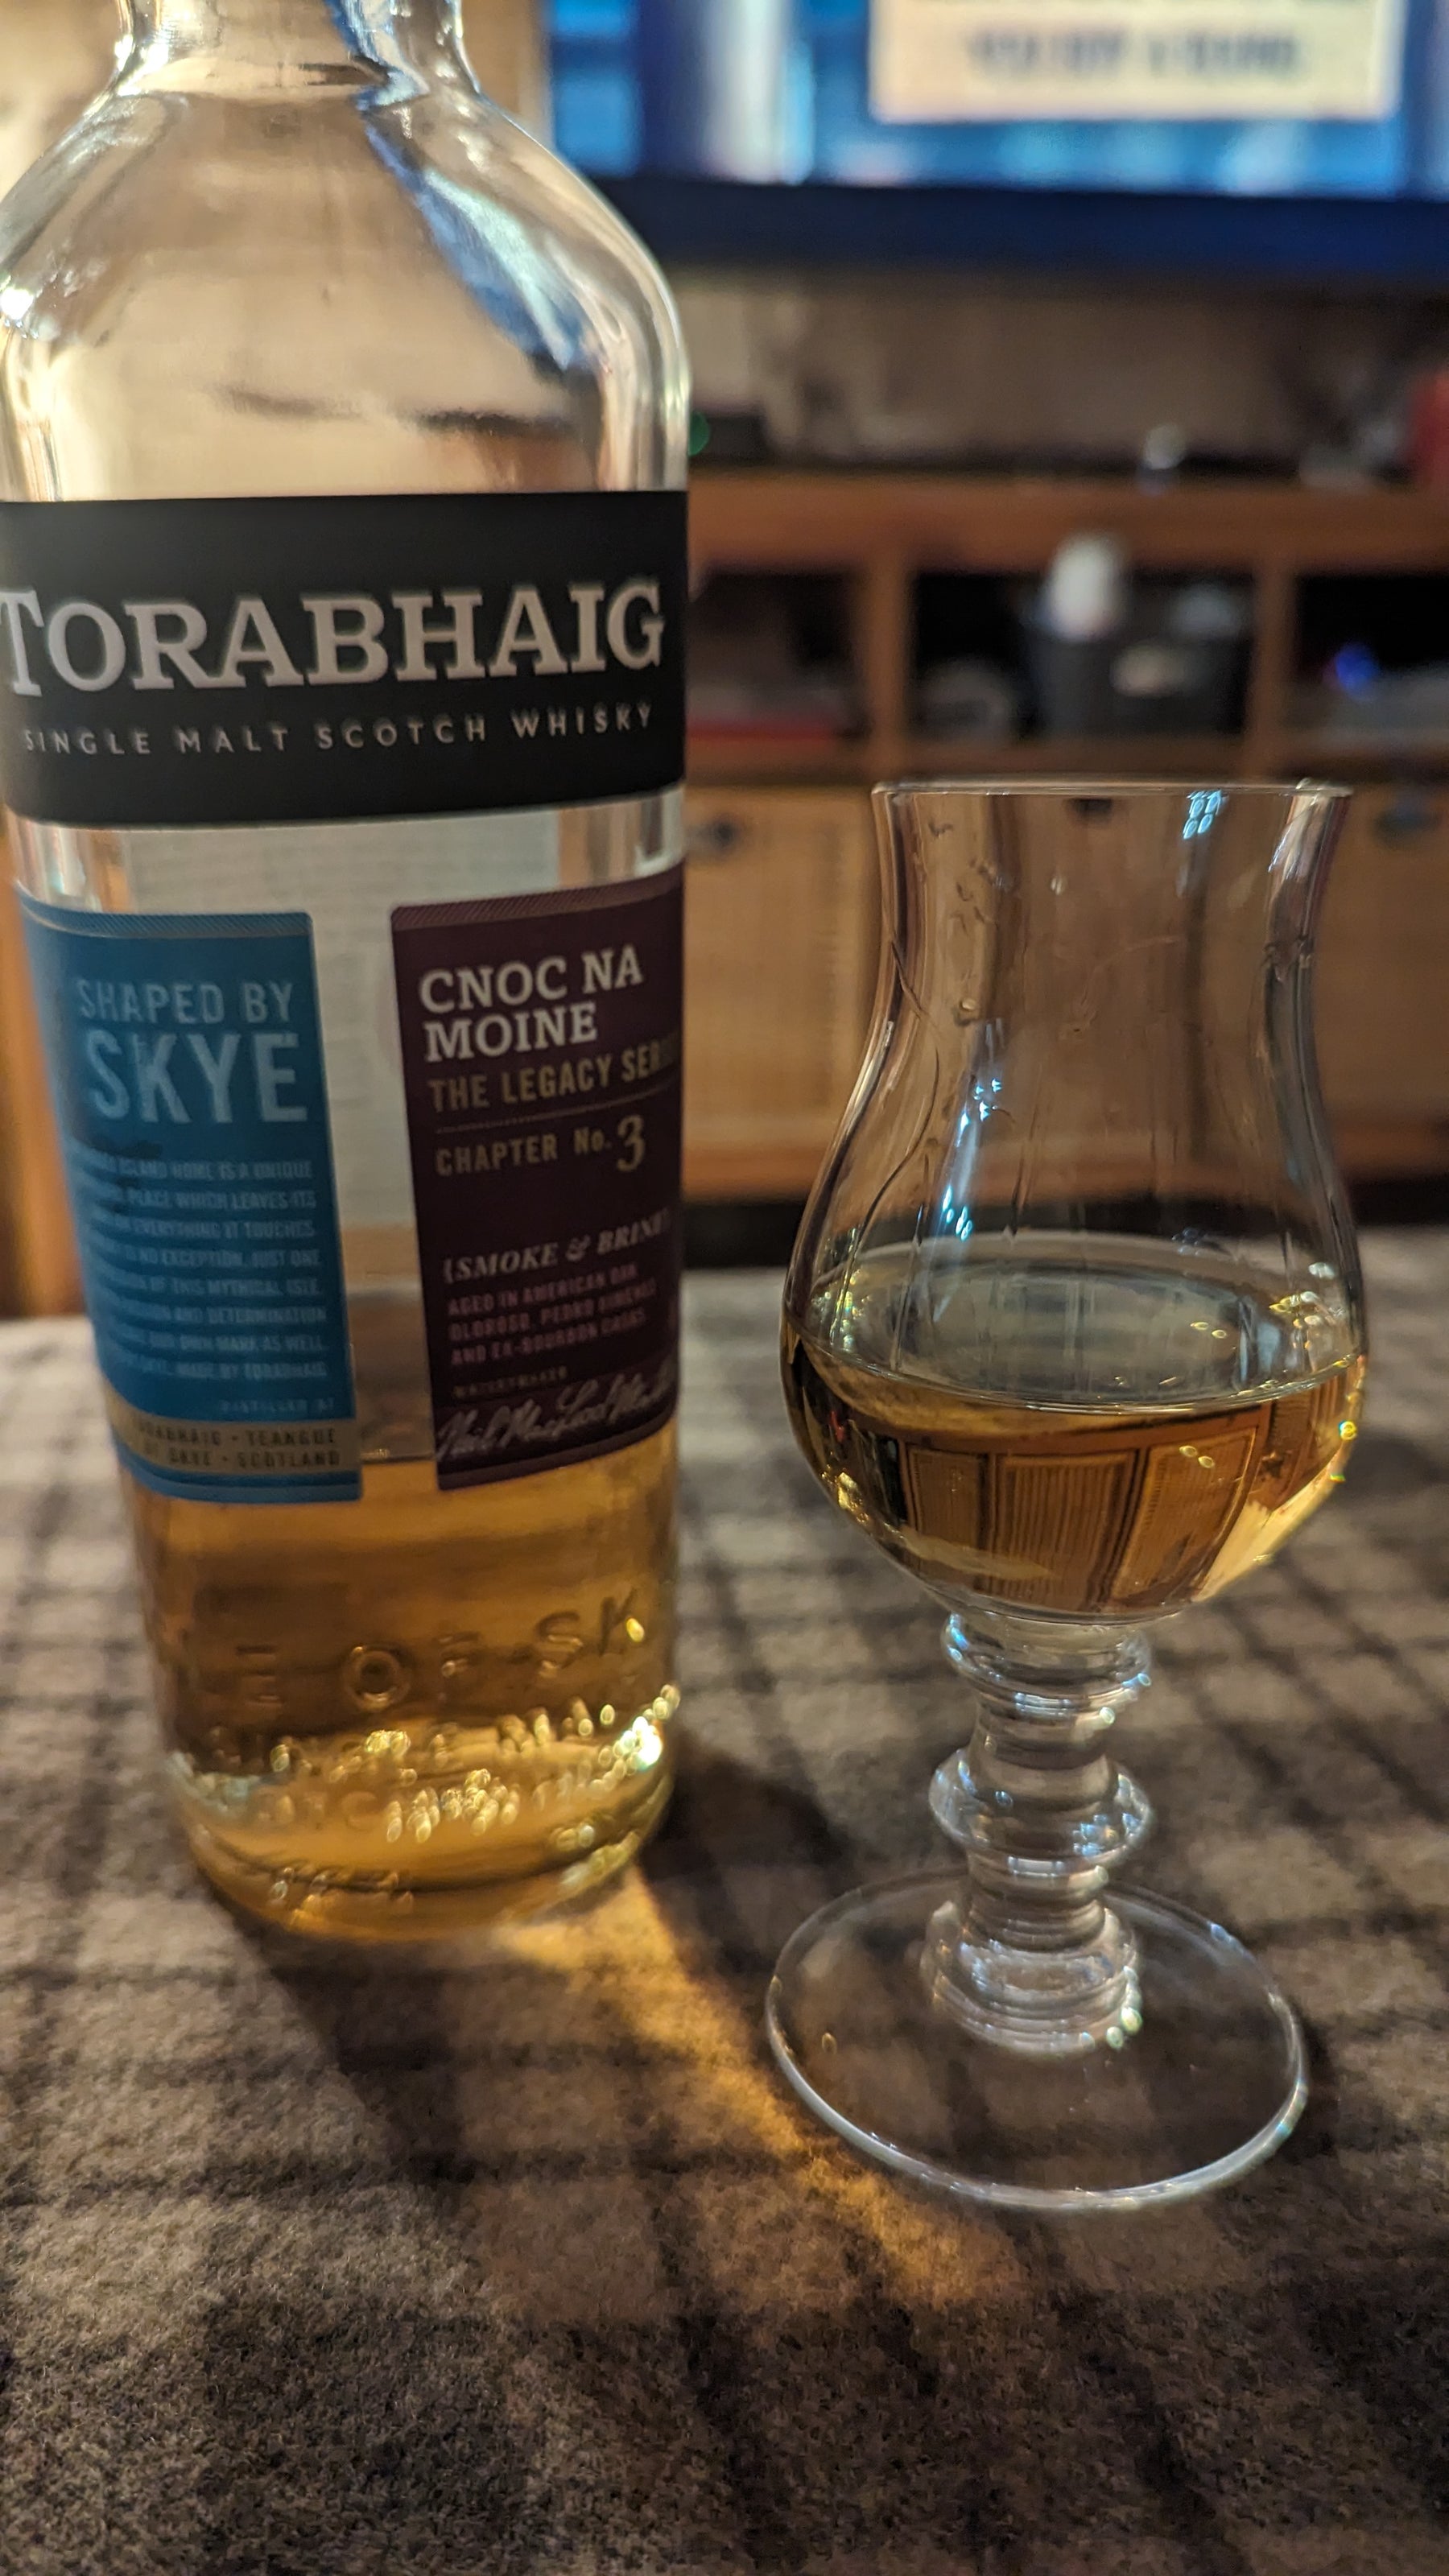 Torabhaig Distillery and the Cnoc Na Moine Release